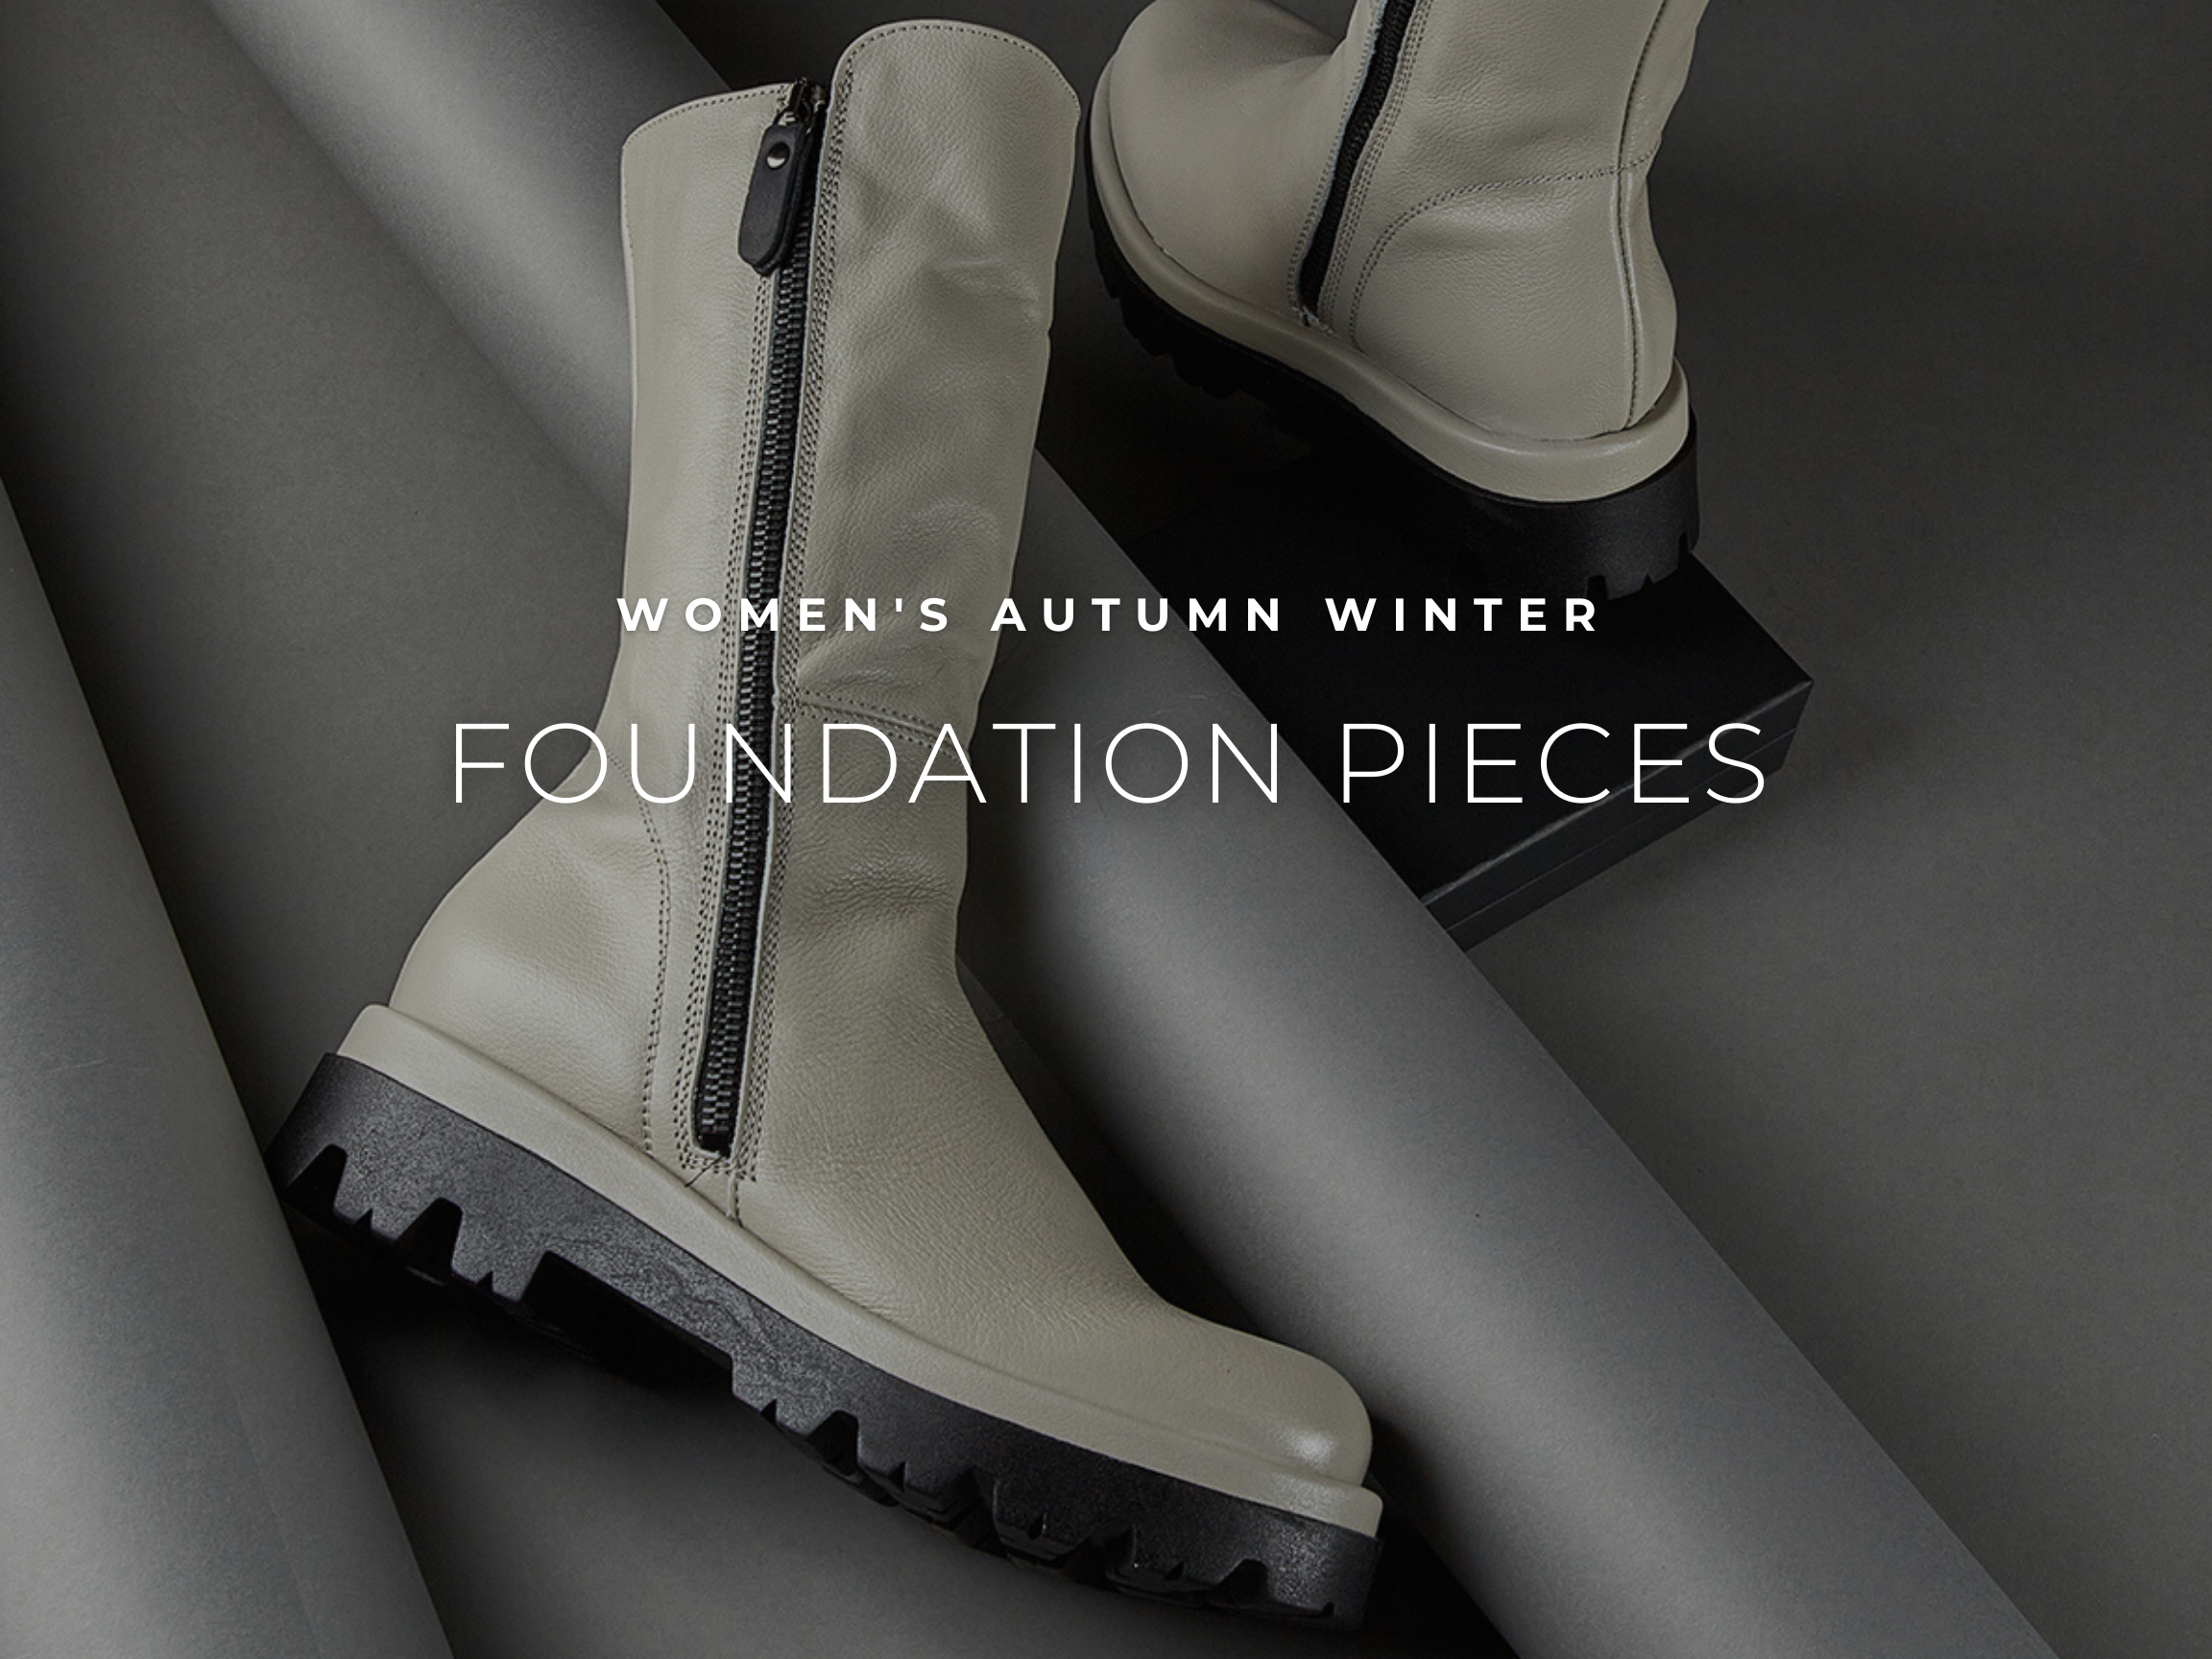 5 Foundation Pieces For Autumn Winter